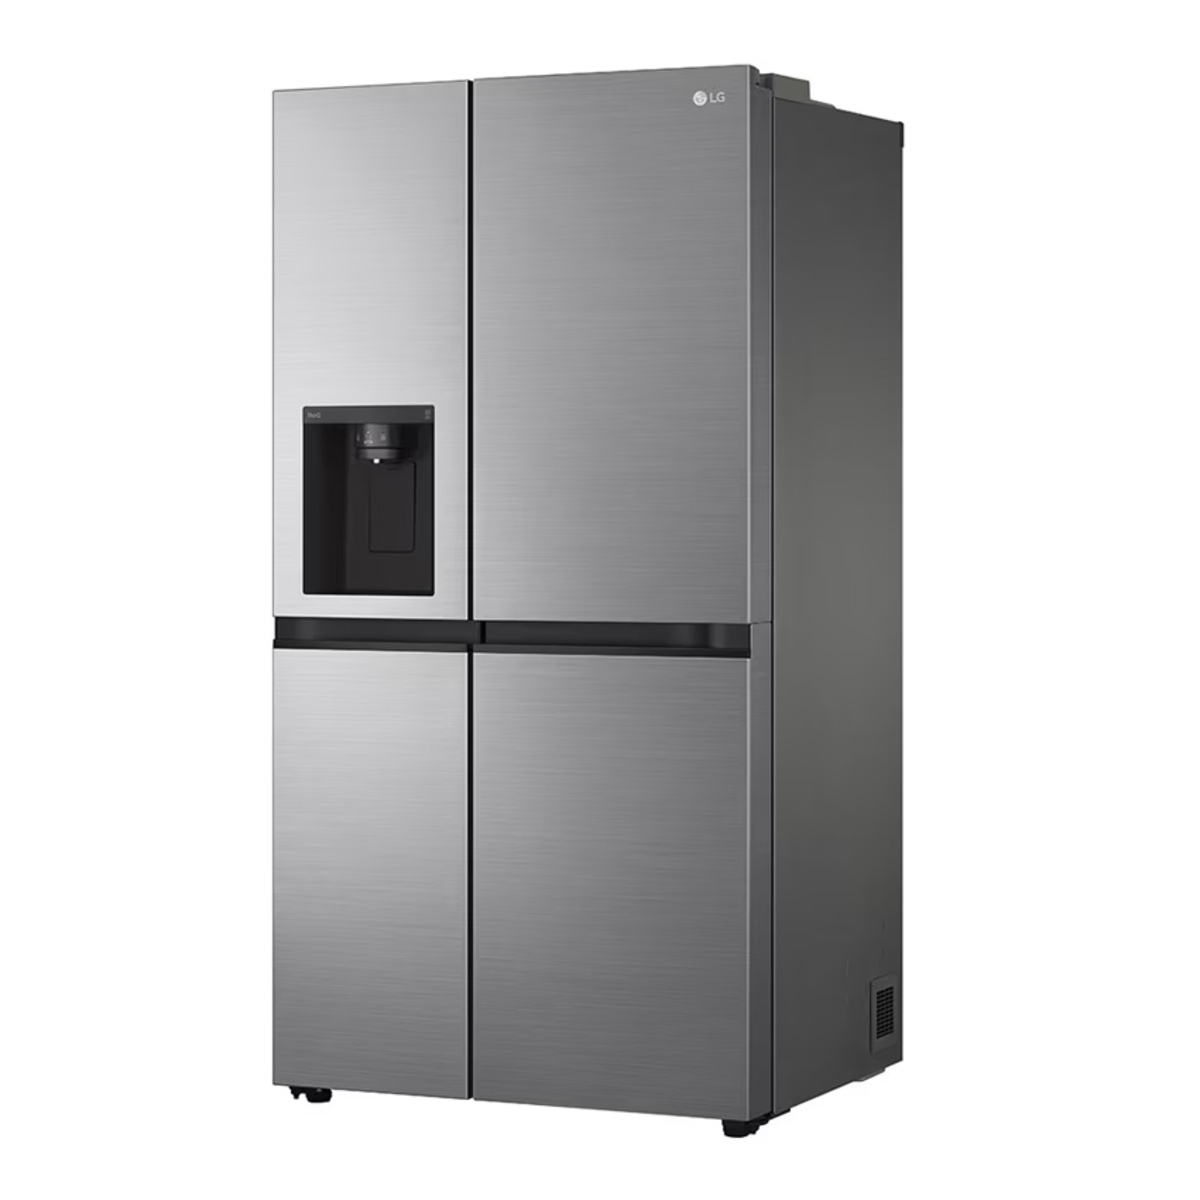 LG GSLV51PZXL E Rated 635L American Style Fridge Freezer, Non Plumbed